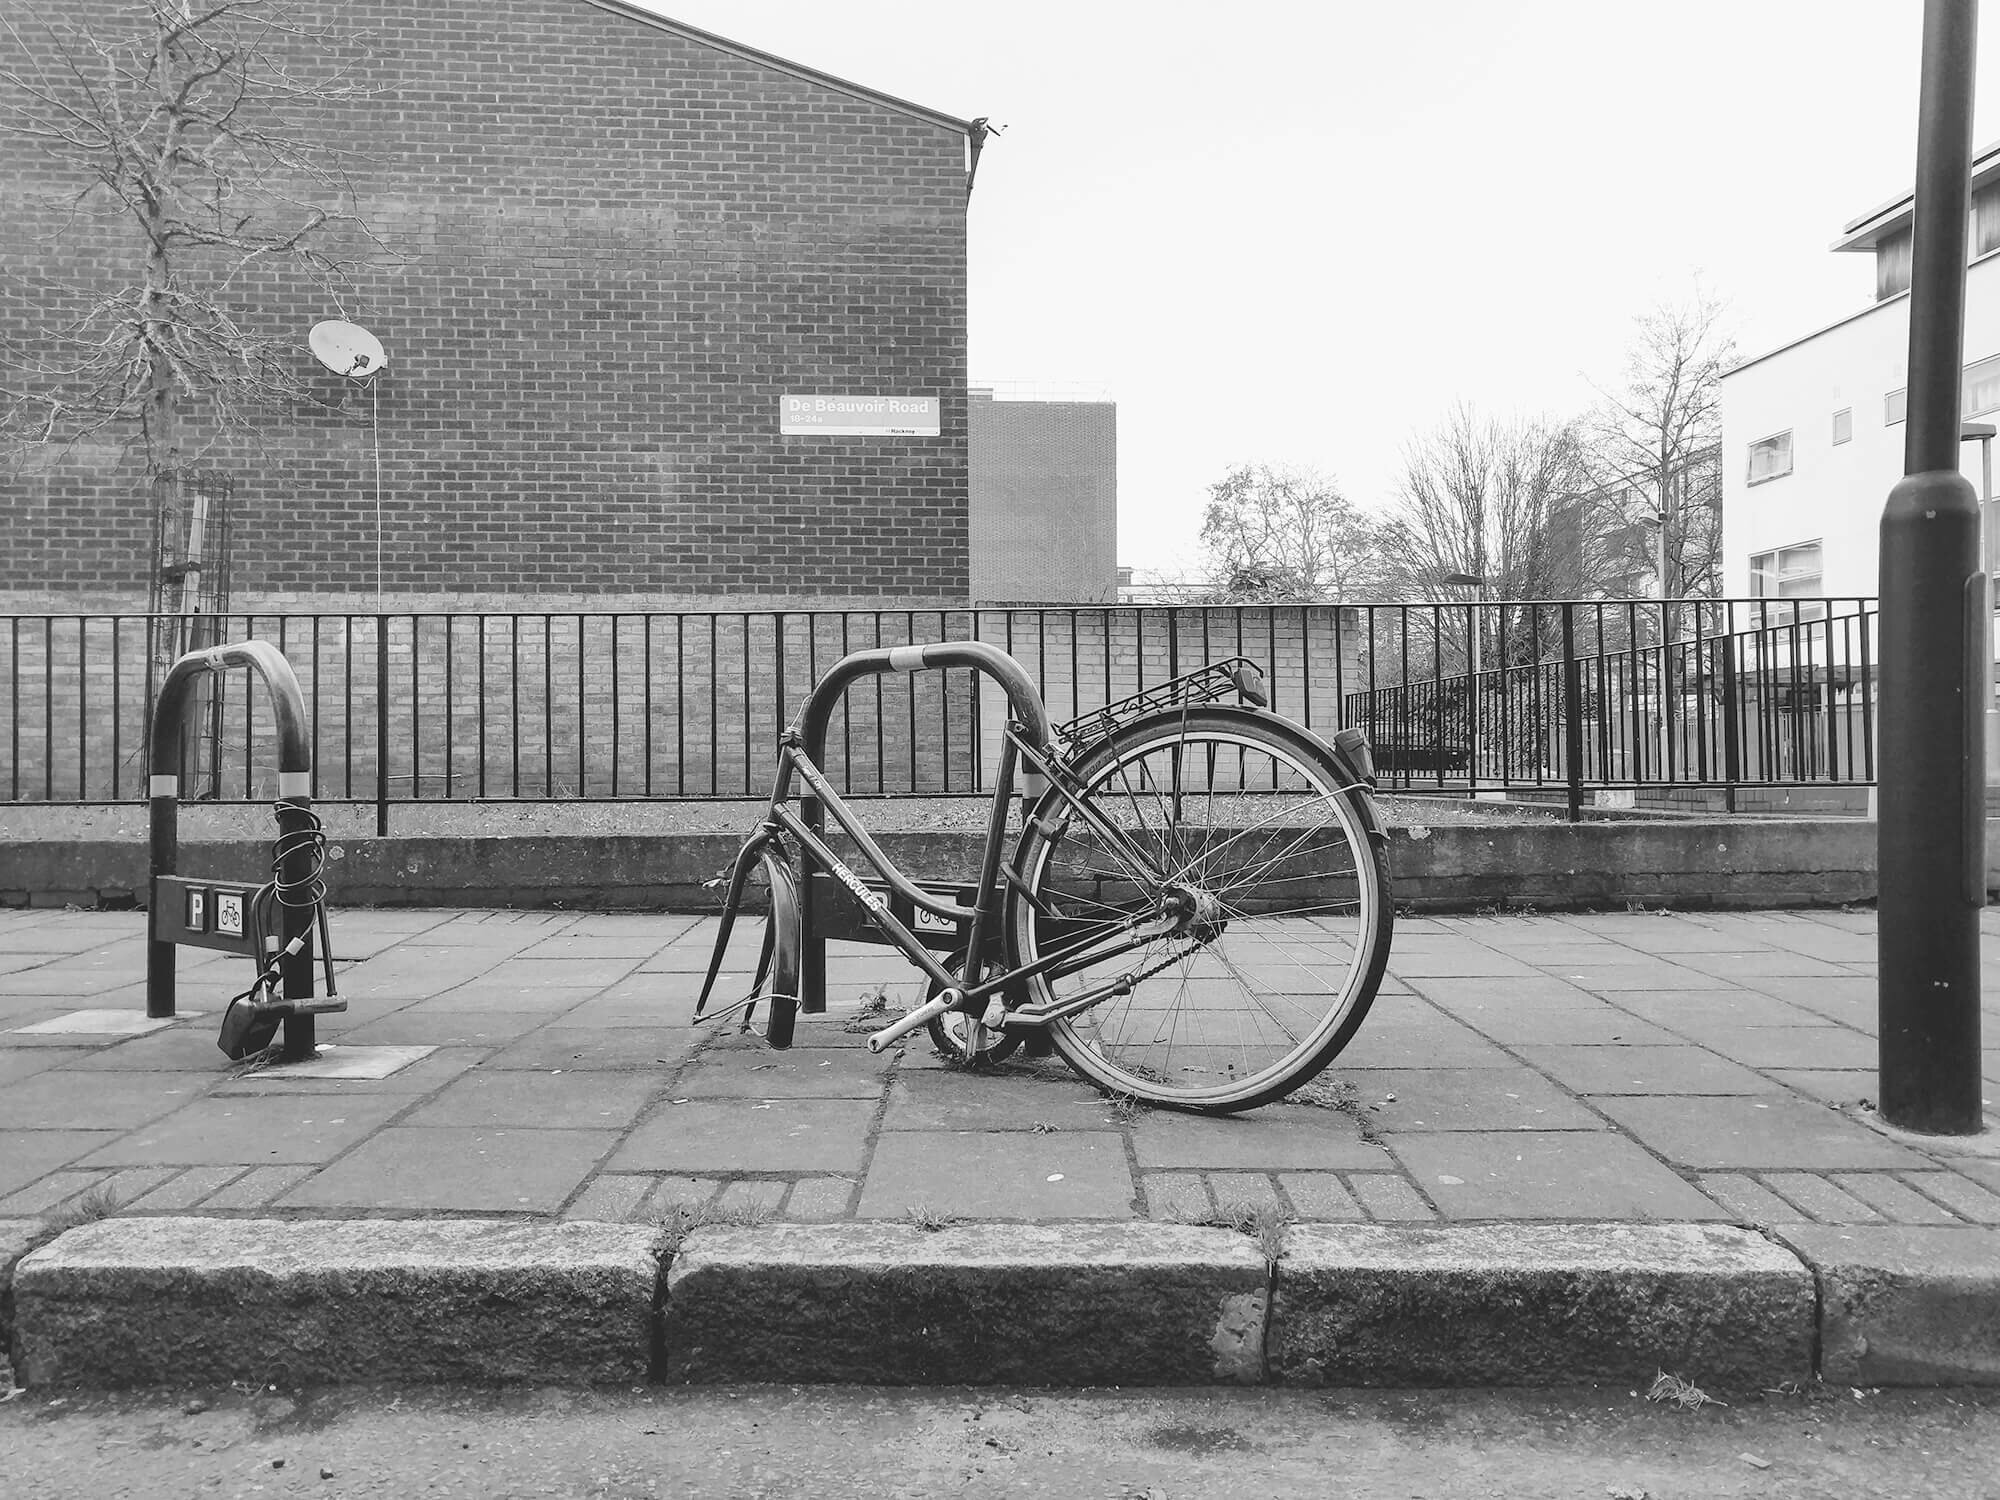 Town bike missing front wheel. abandoned on a London street. Black and white.